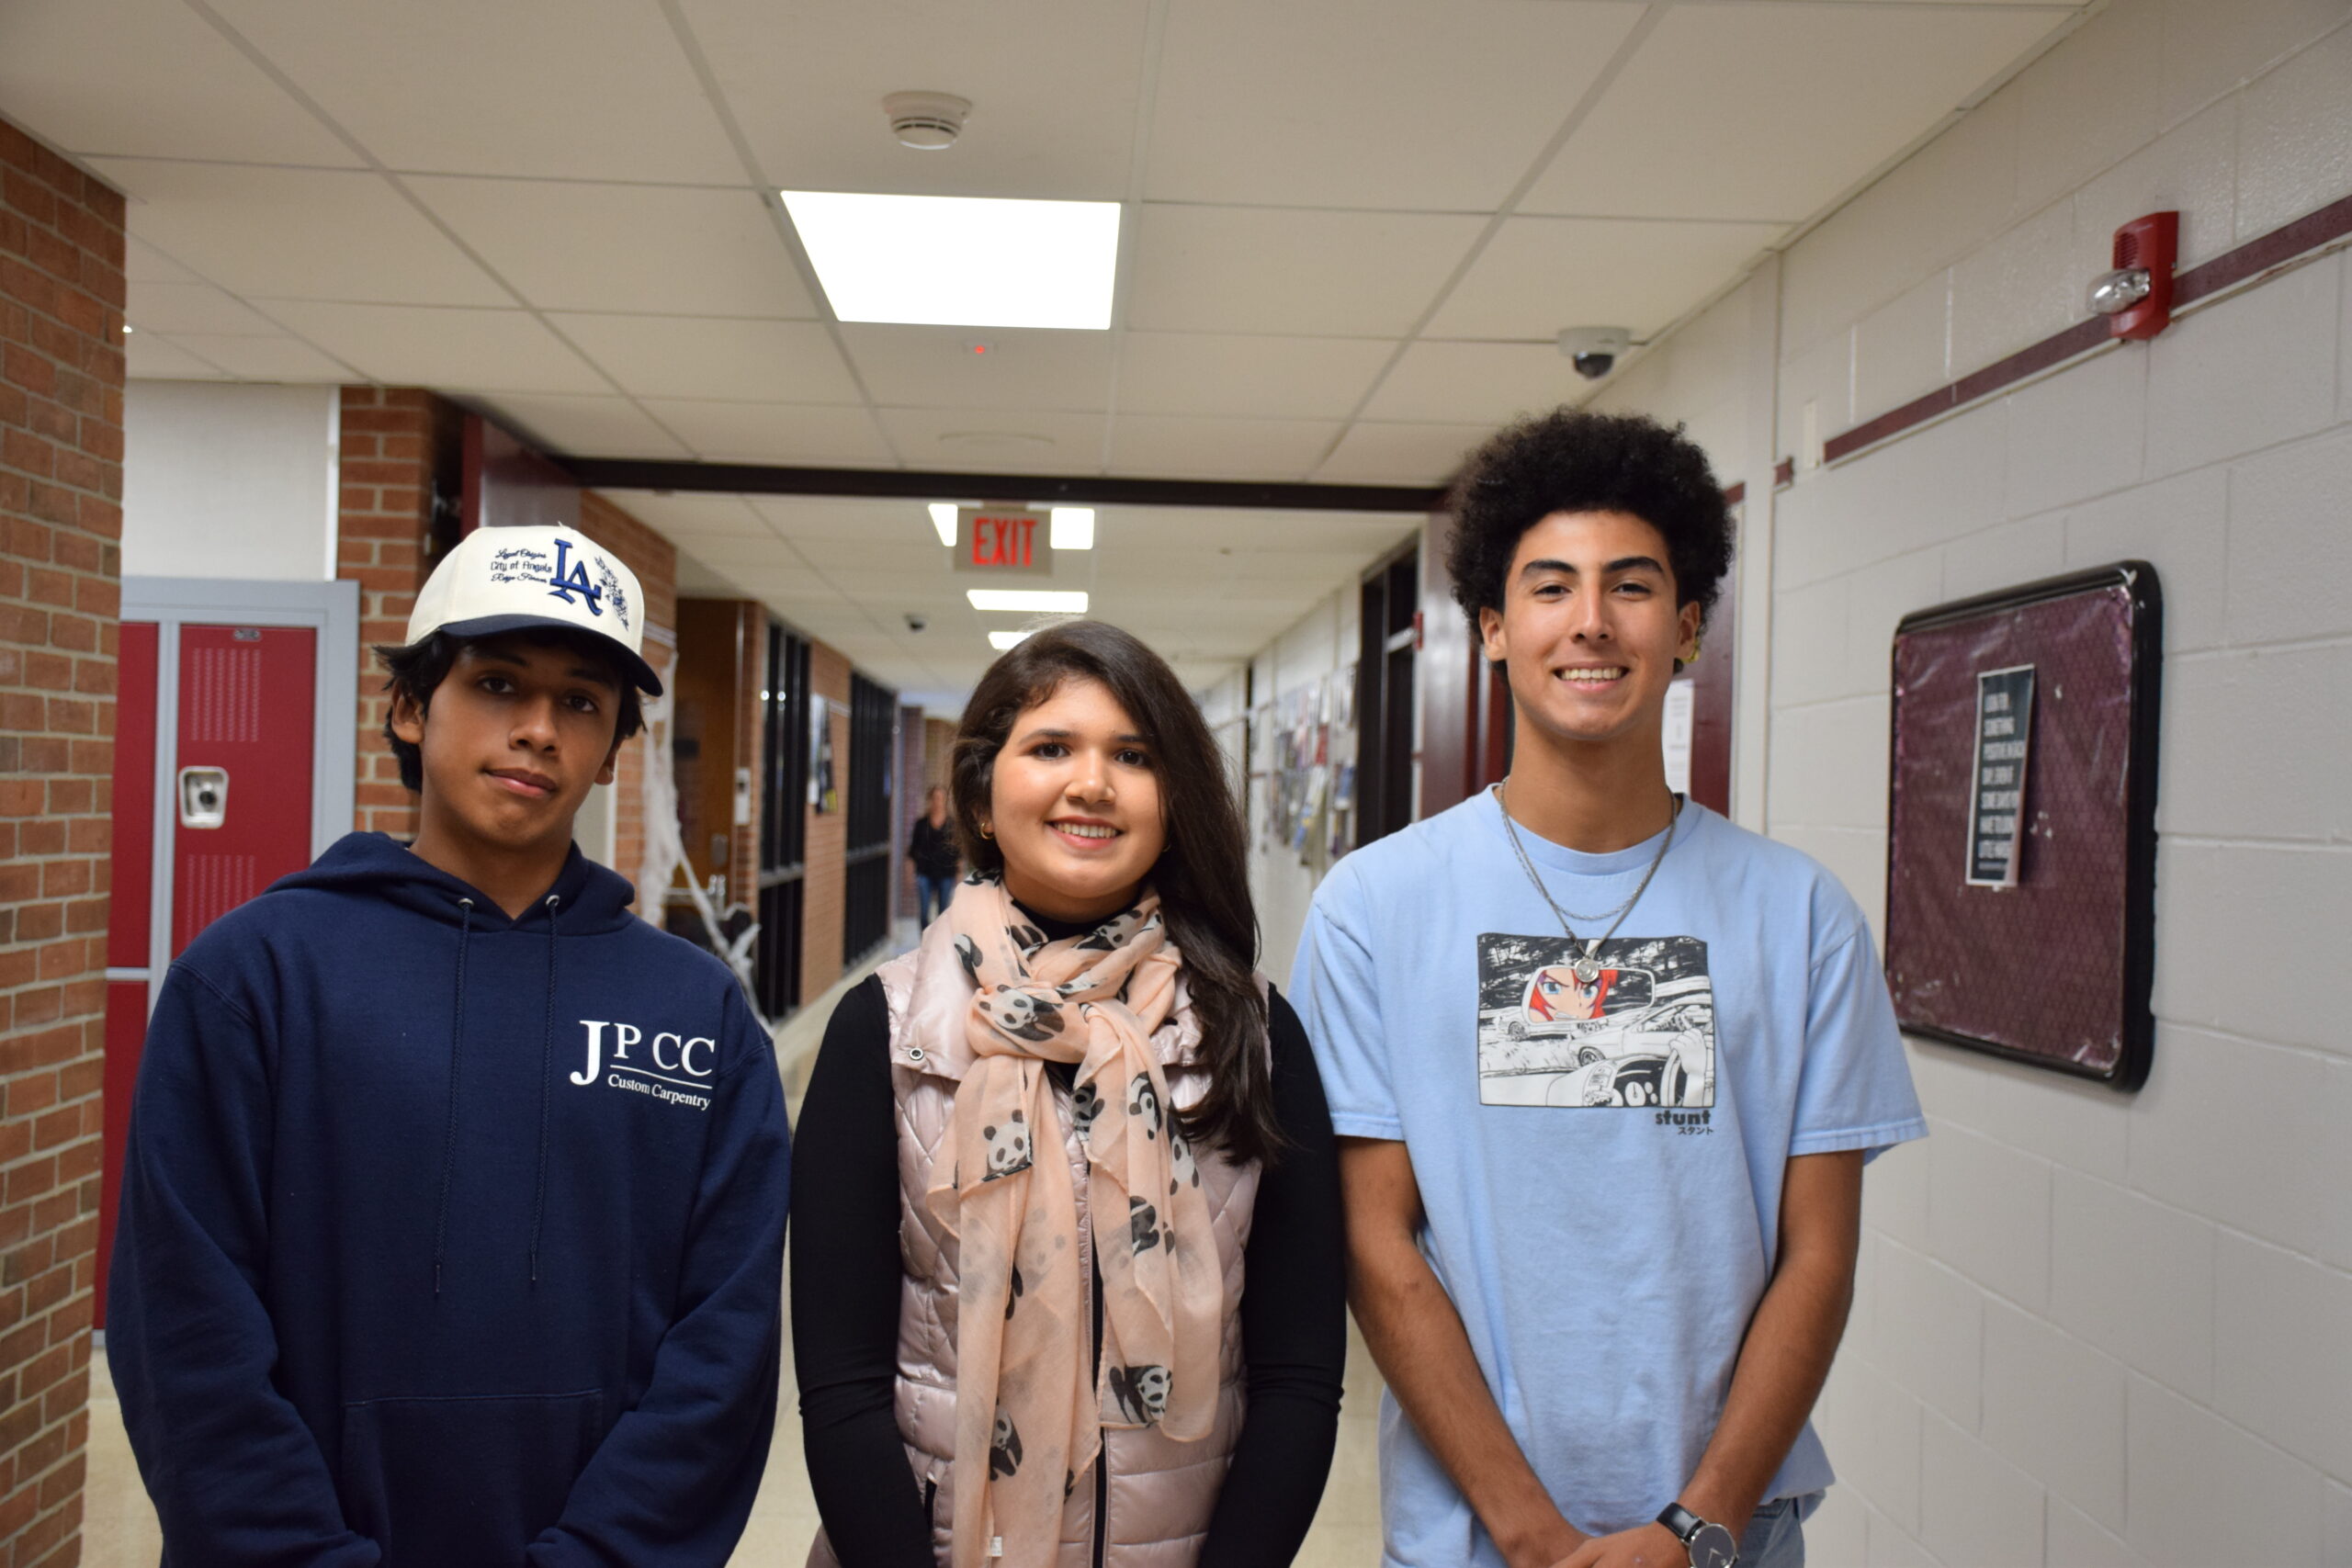 Southampton High School students Brandon Perez, Sophia Oliveira and Yassine Boukaissi earned national recognition through the College Board National Recognition Program. COURTESY SOUTHAMPTON SCHOOL DISTRICT